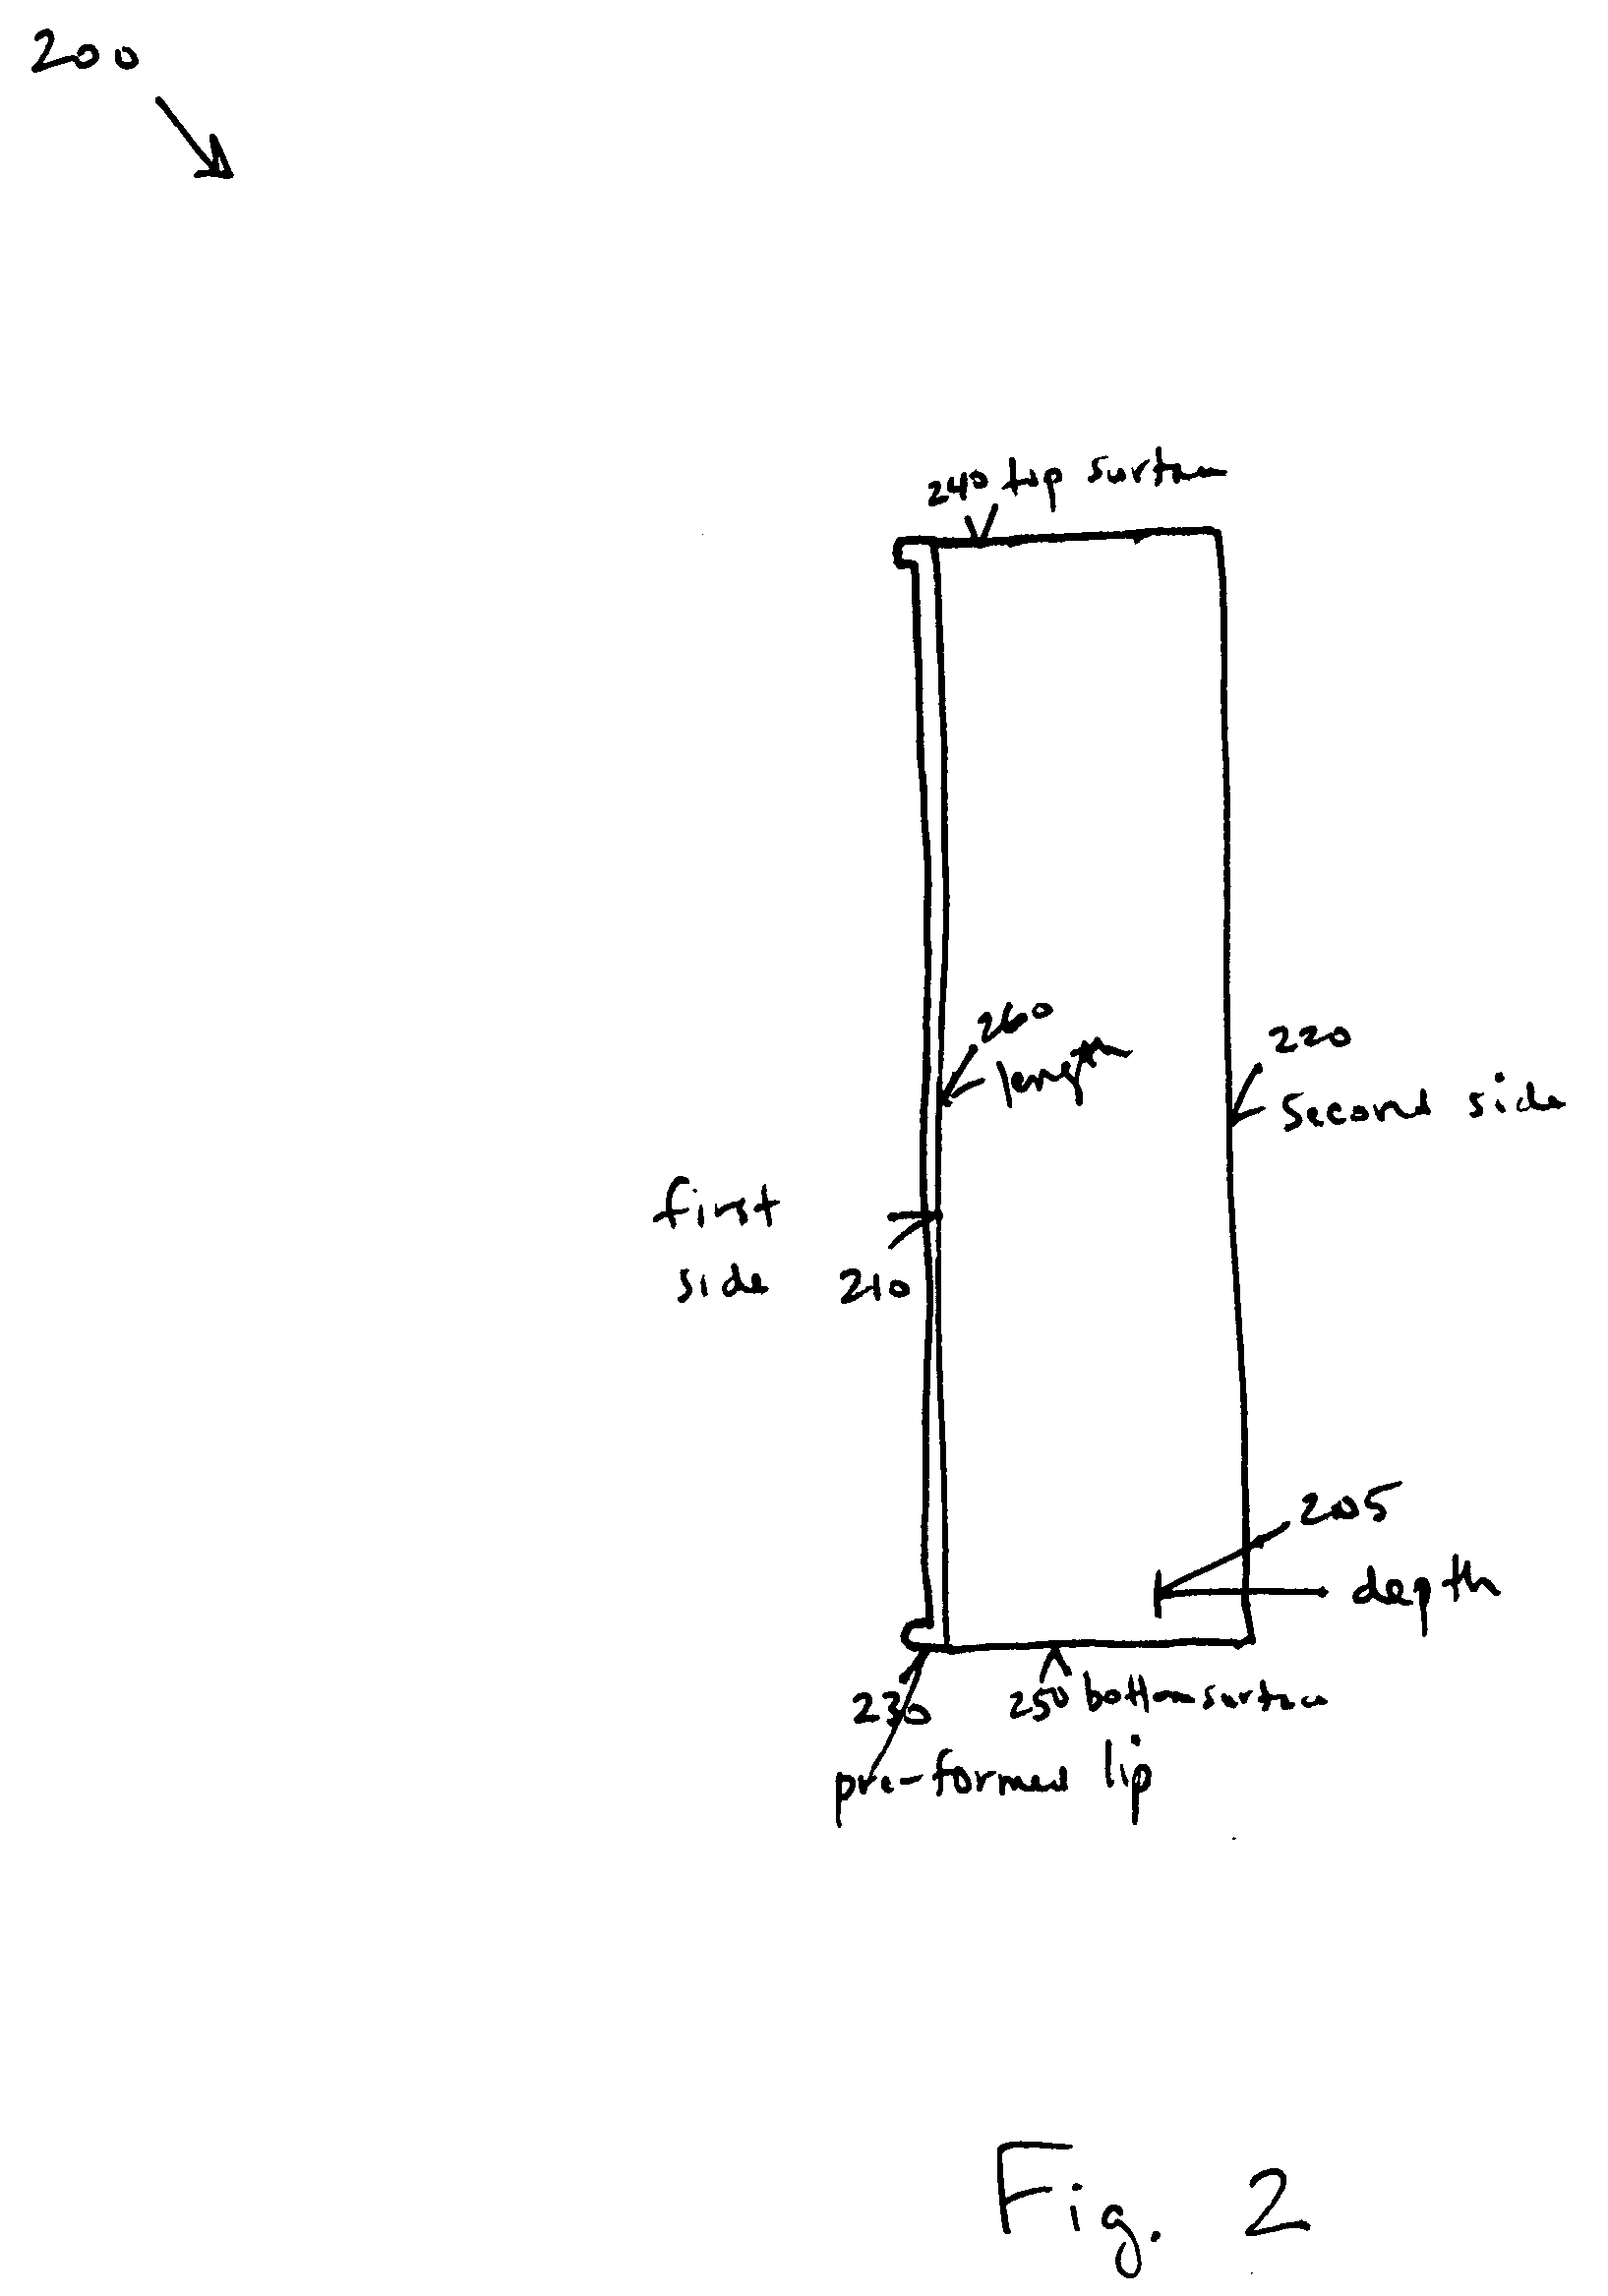 Window frame with lip for covering windows